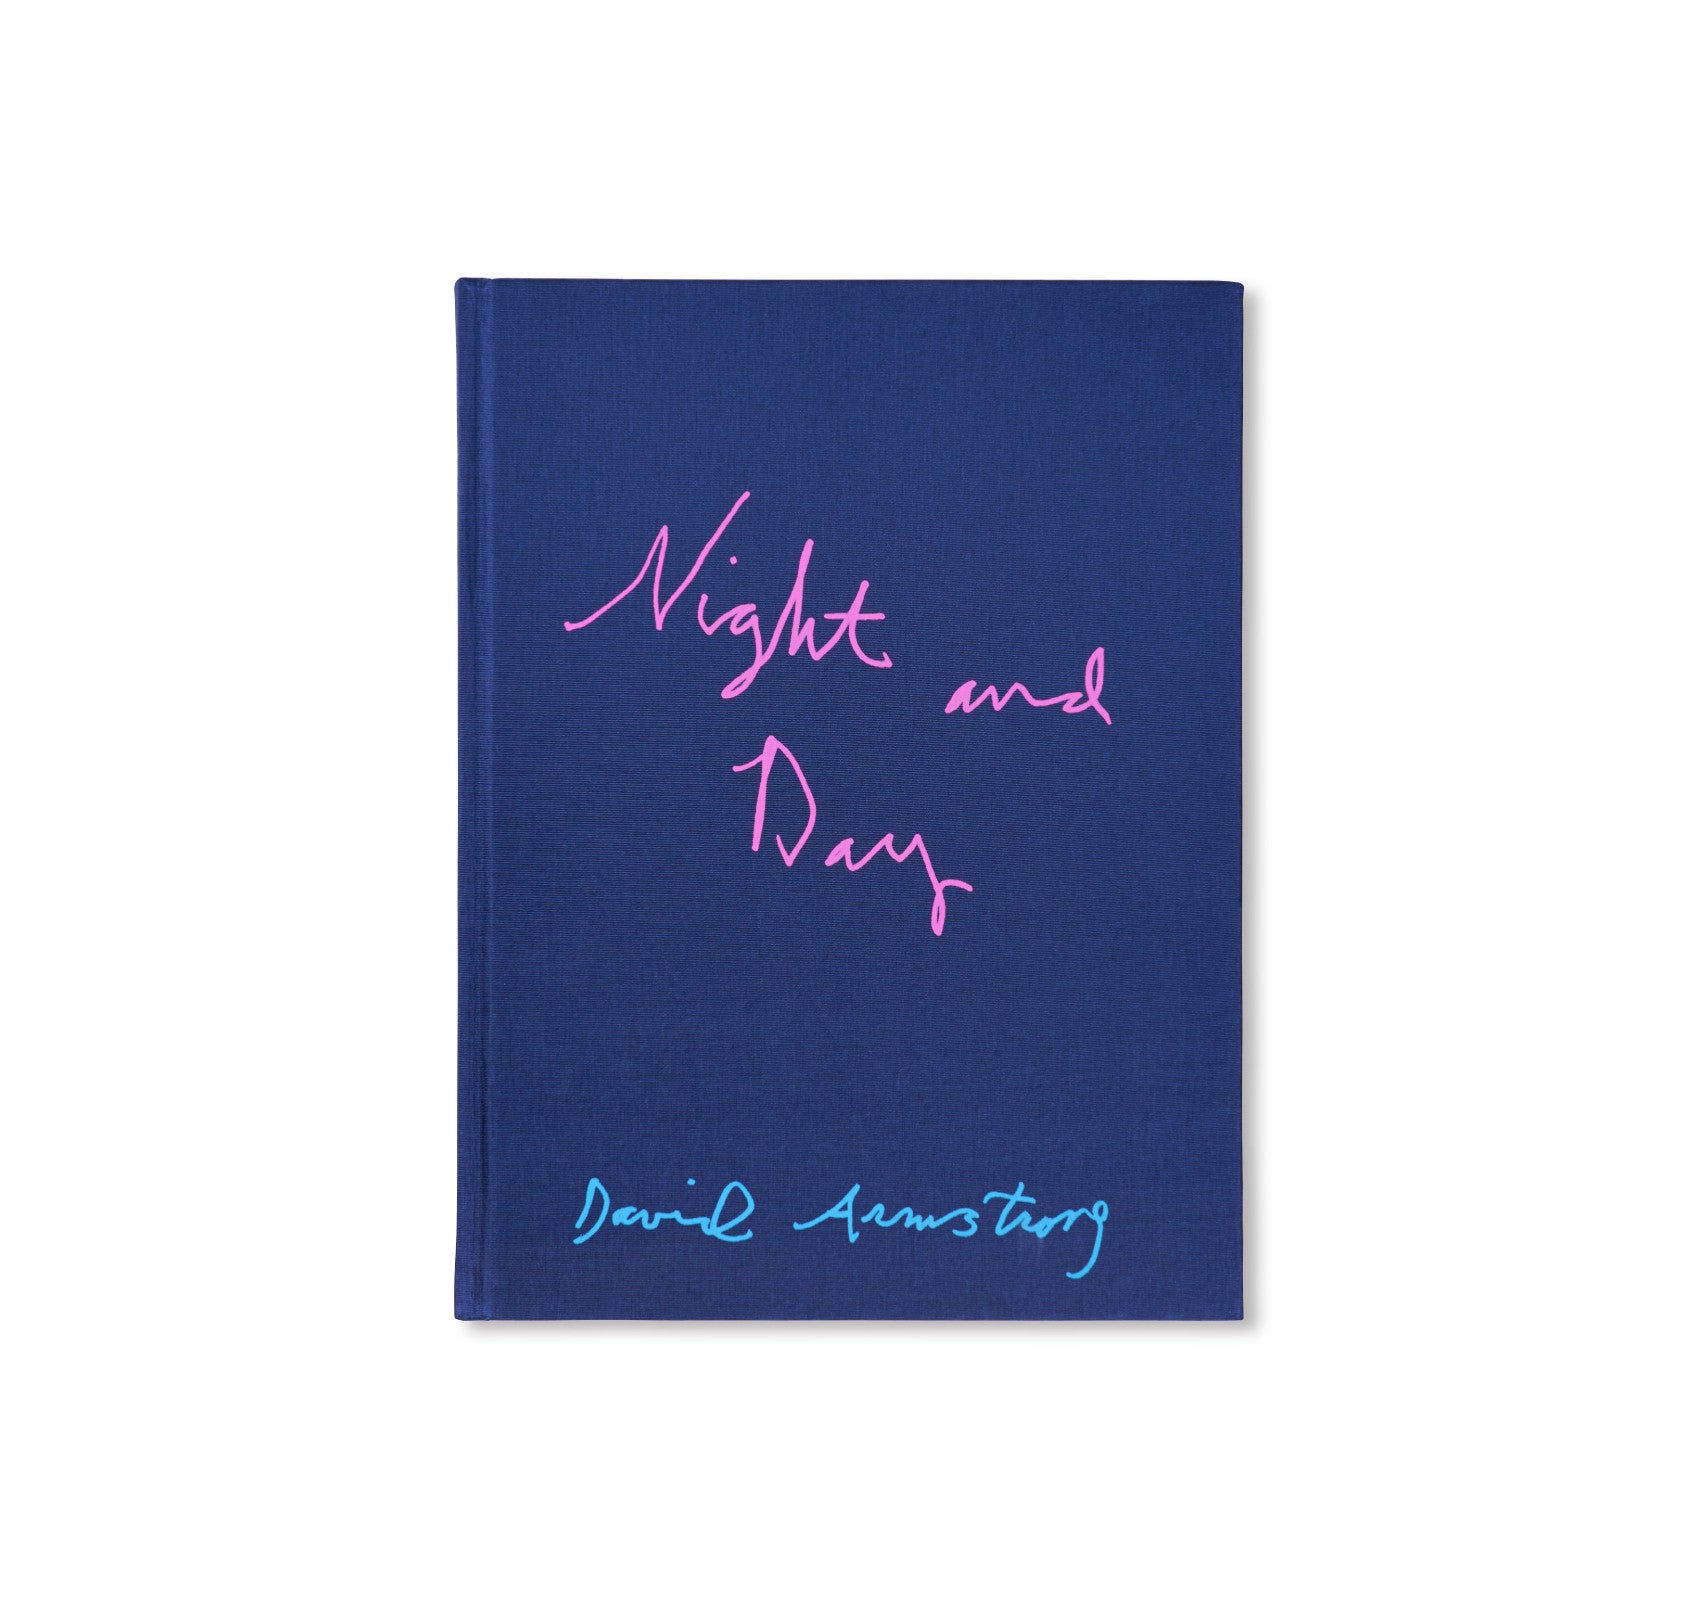 NIGHT AND DAY by David Armstrong [RARE]